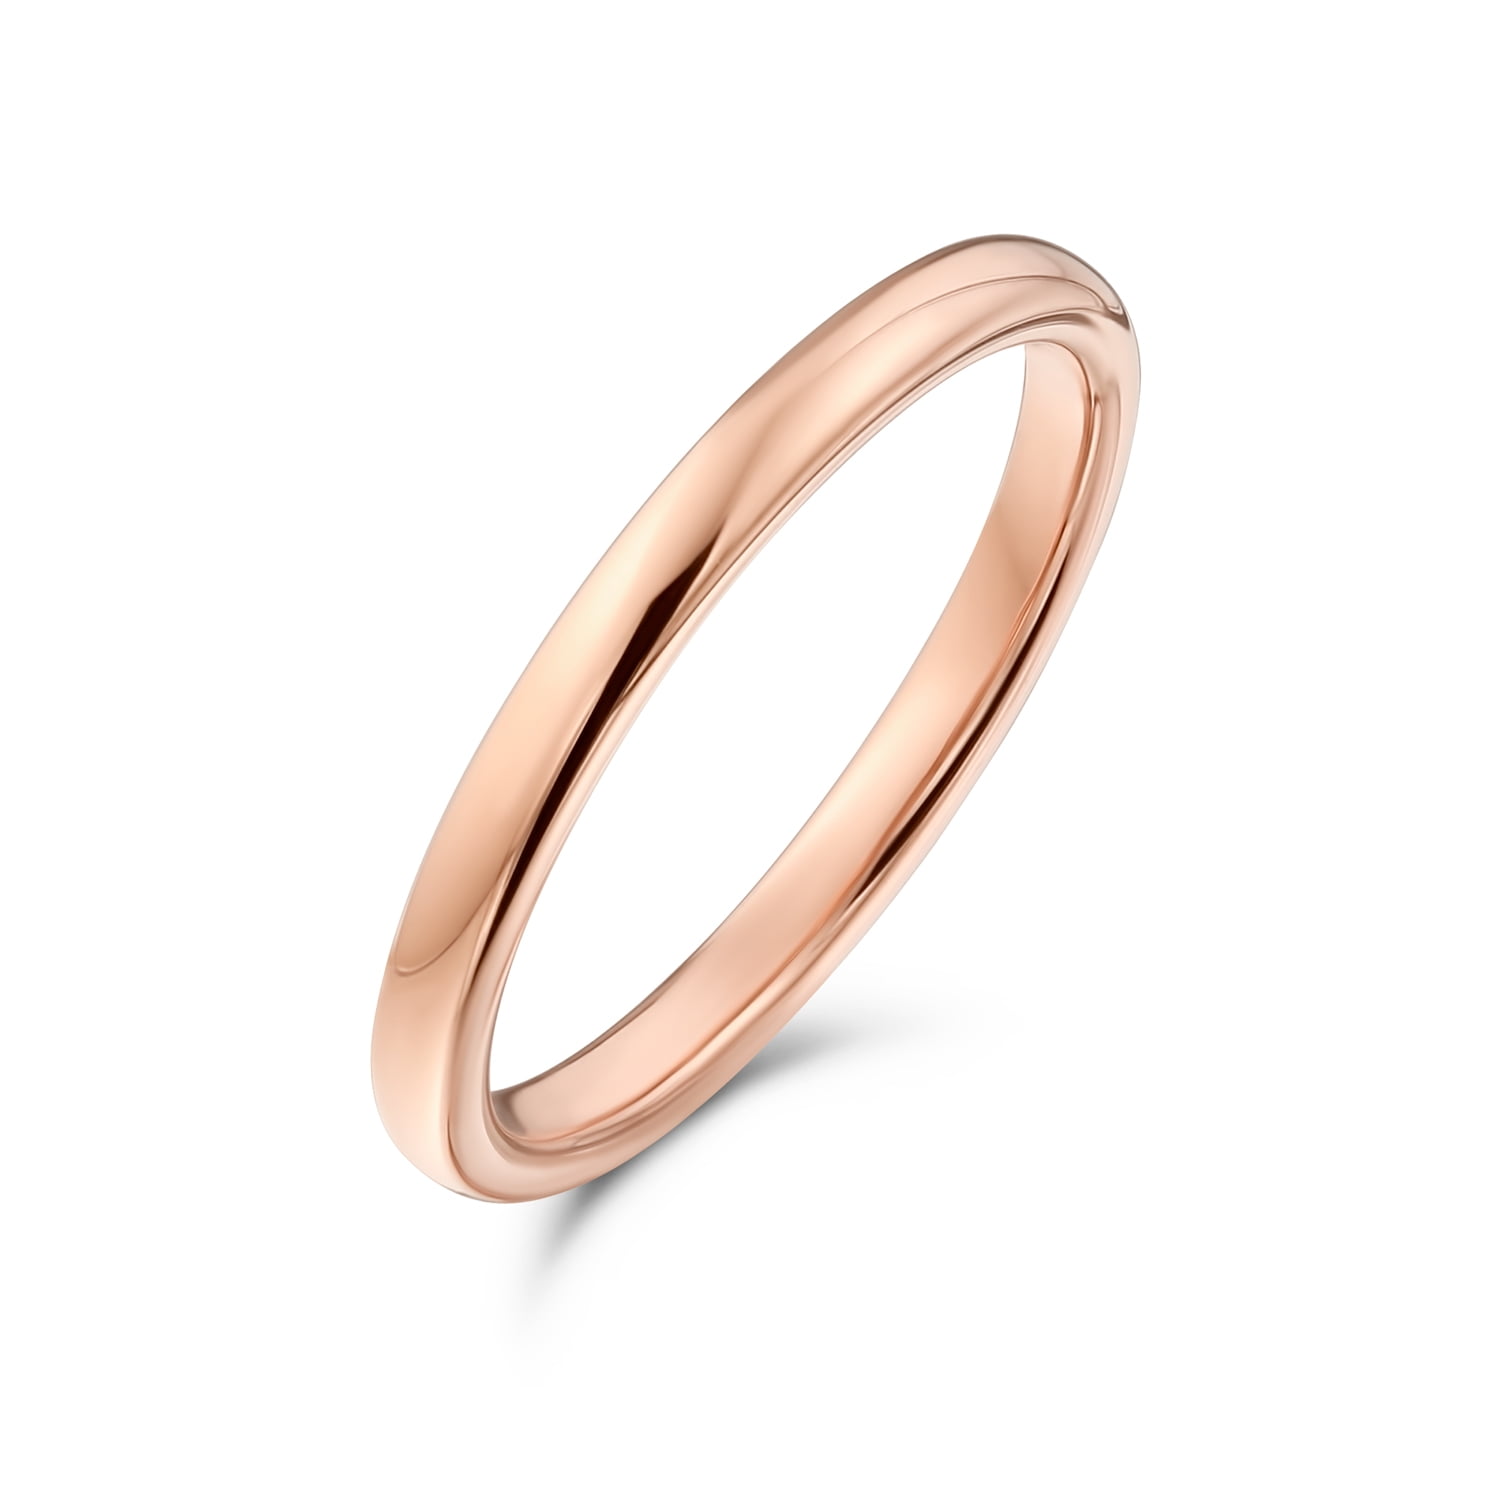 Thin 2mm wide titanium rose gold plated ladies womens wedding band ring size 8 